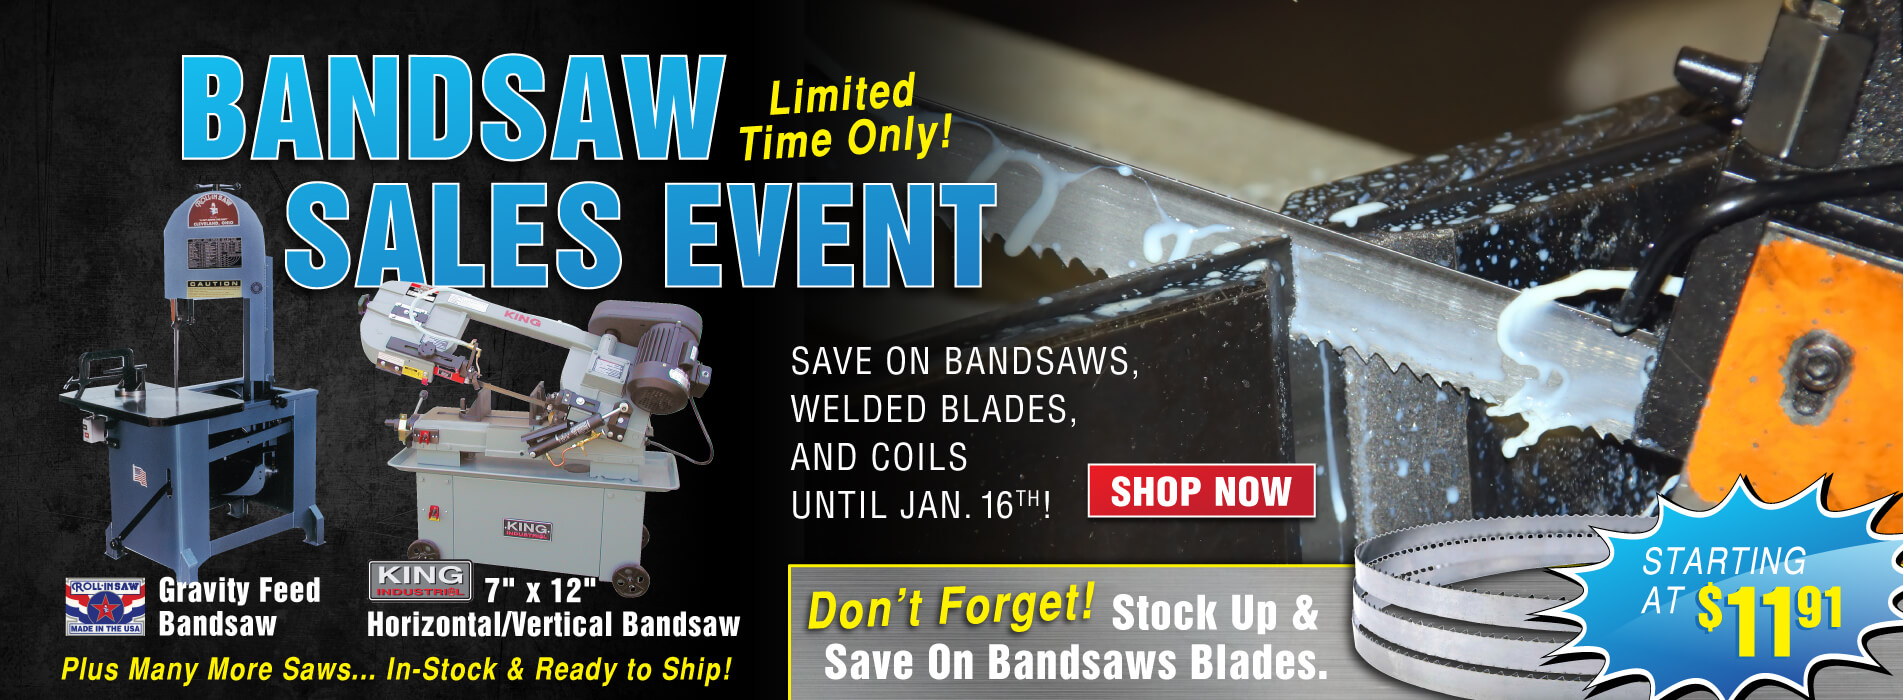 Bandsaw Blade and Bandsaw Sales Event